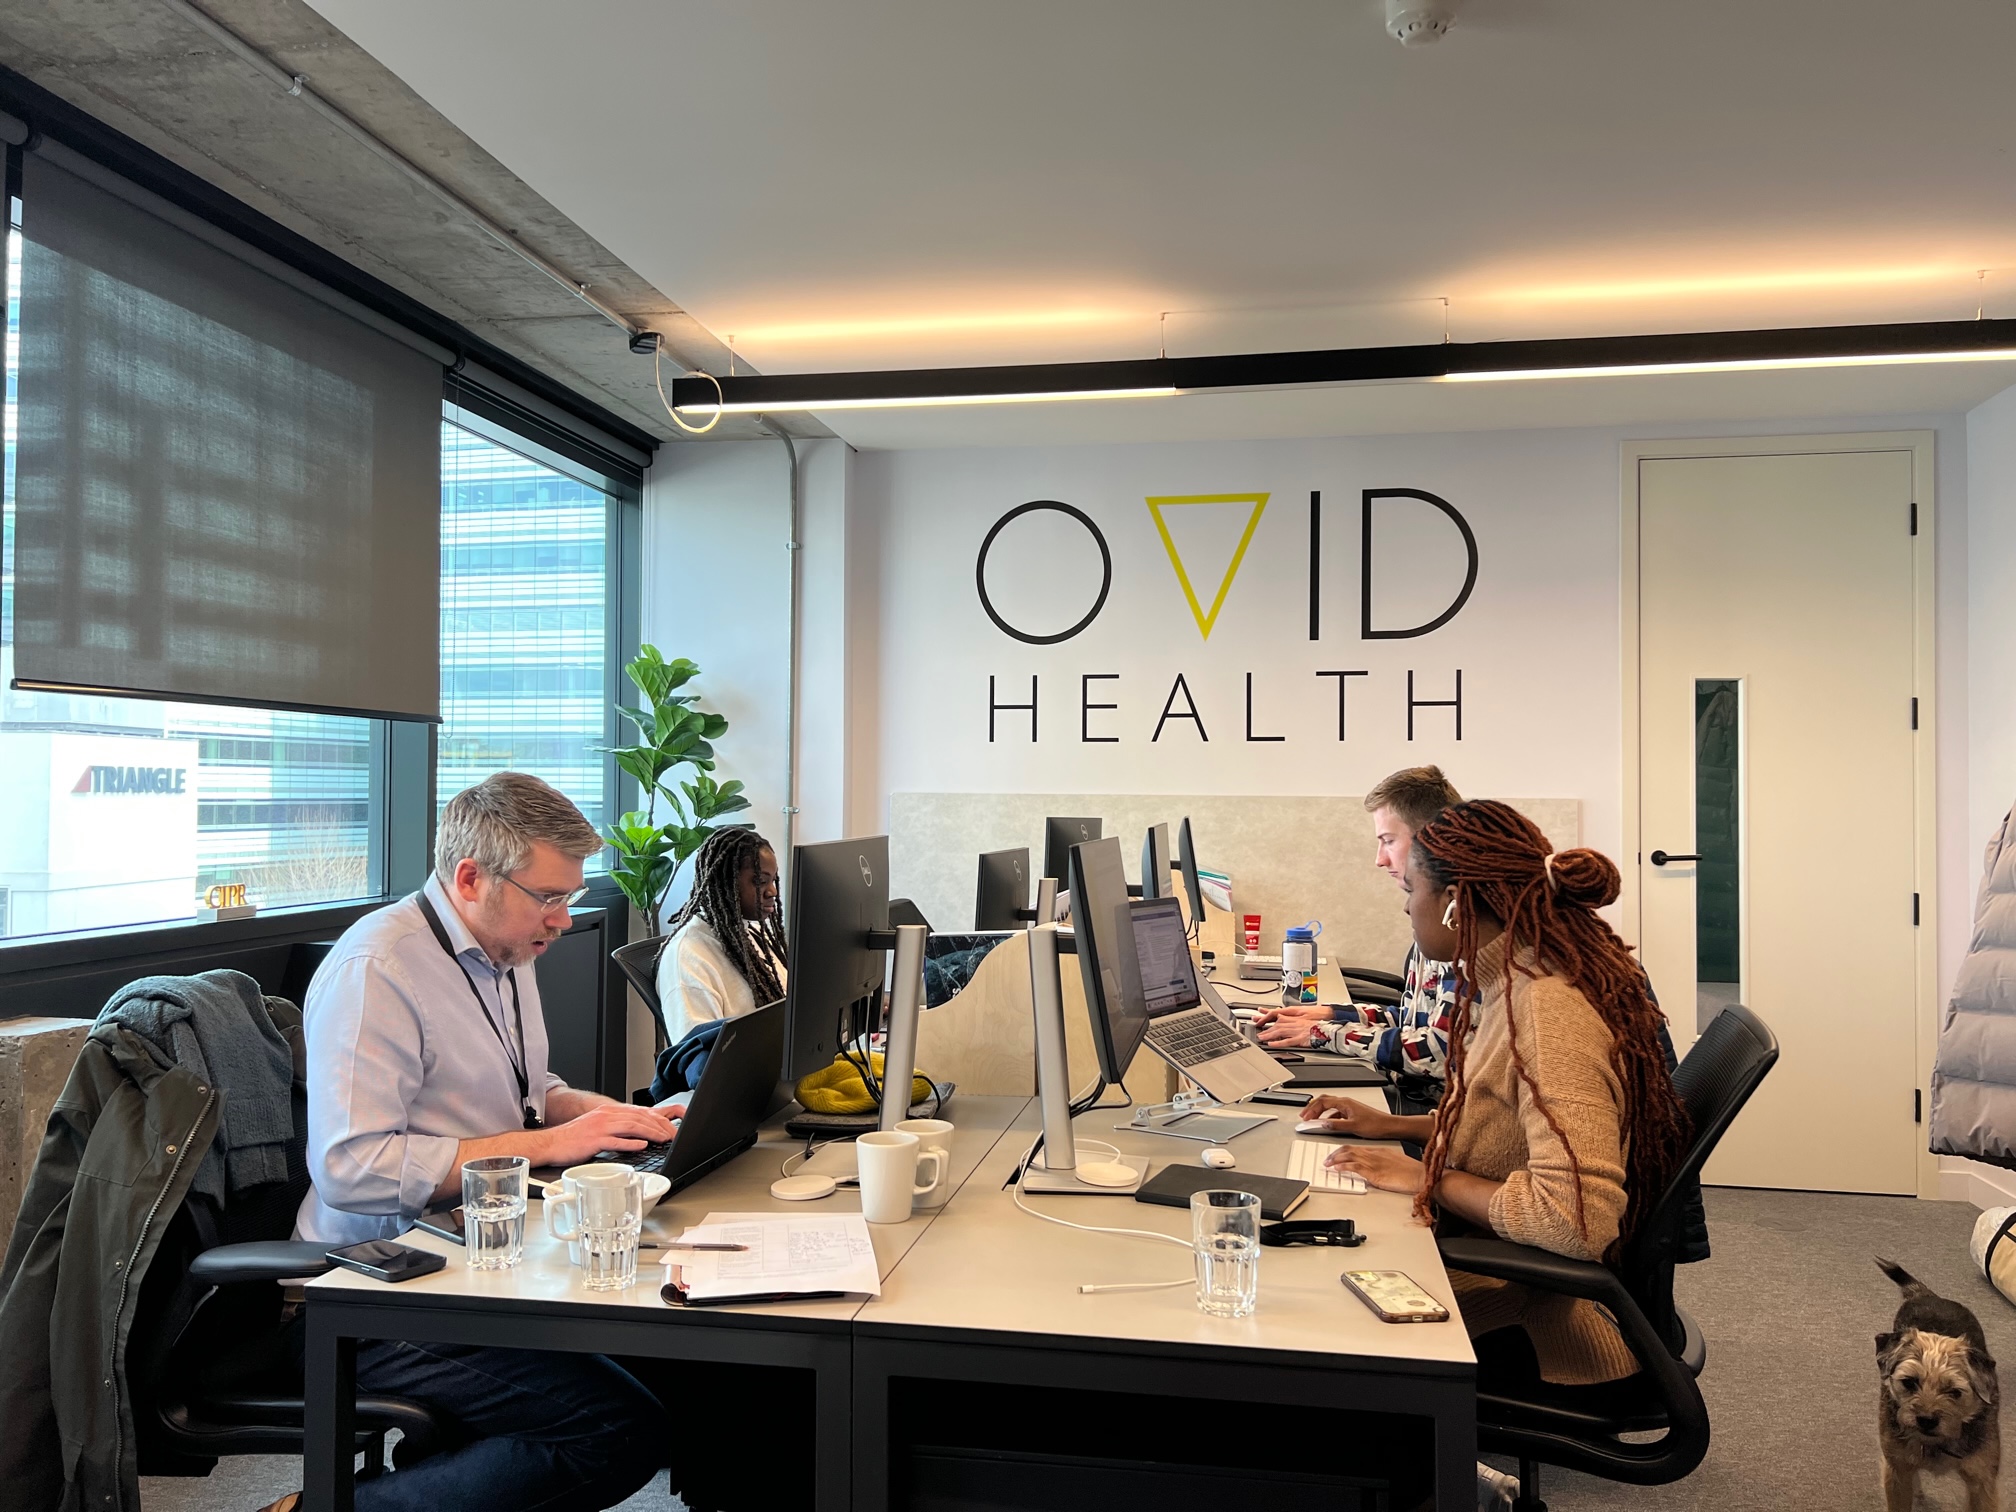 The OVID team at work